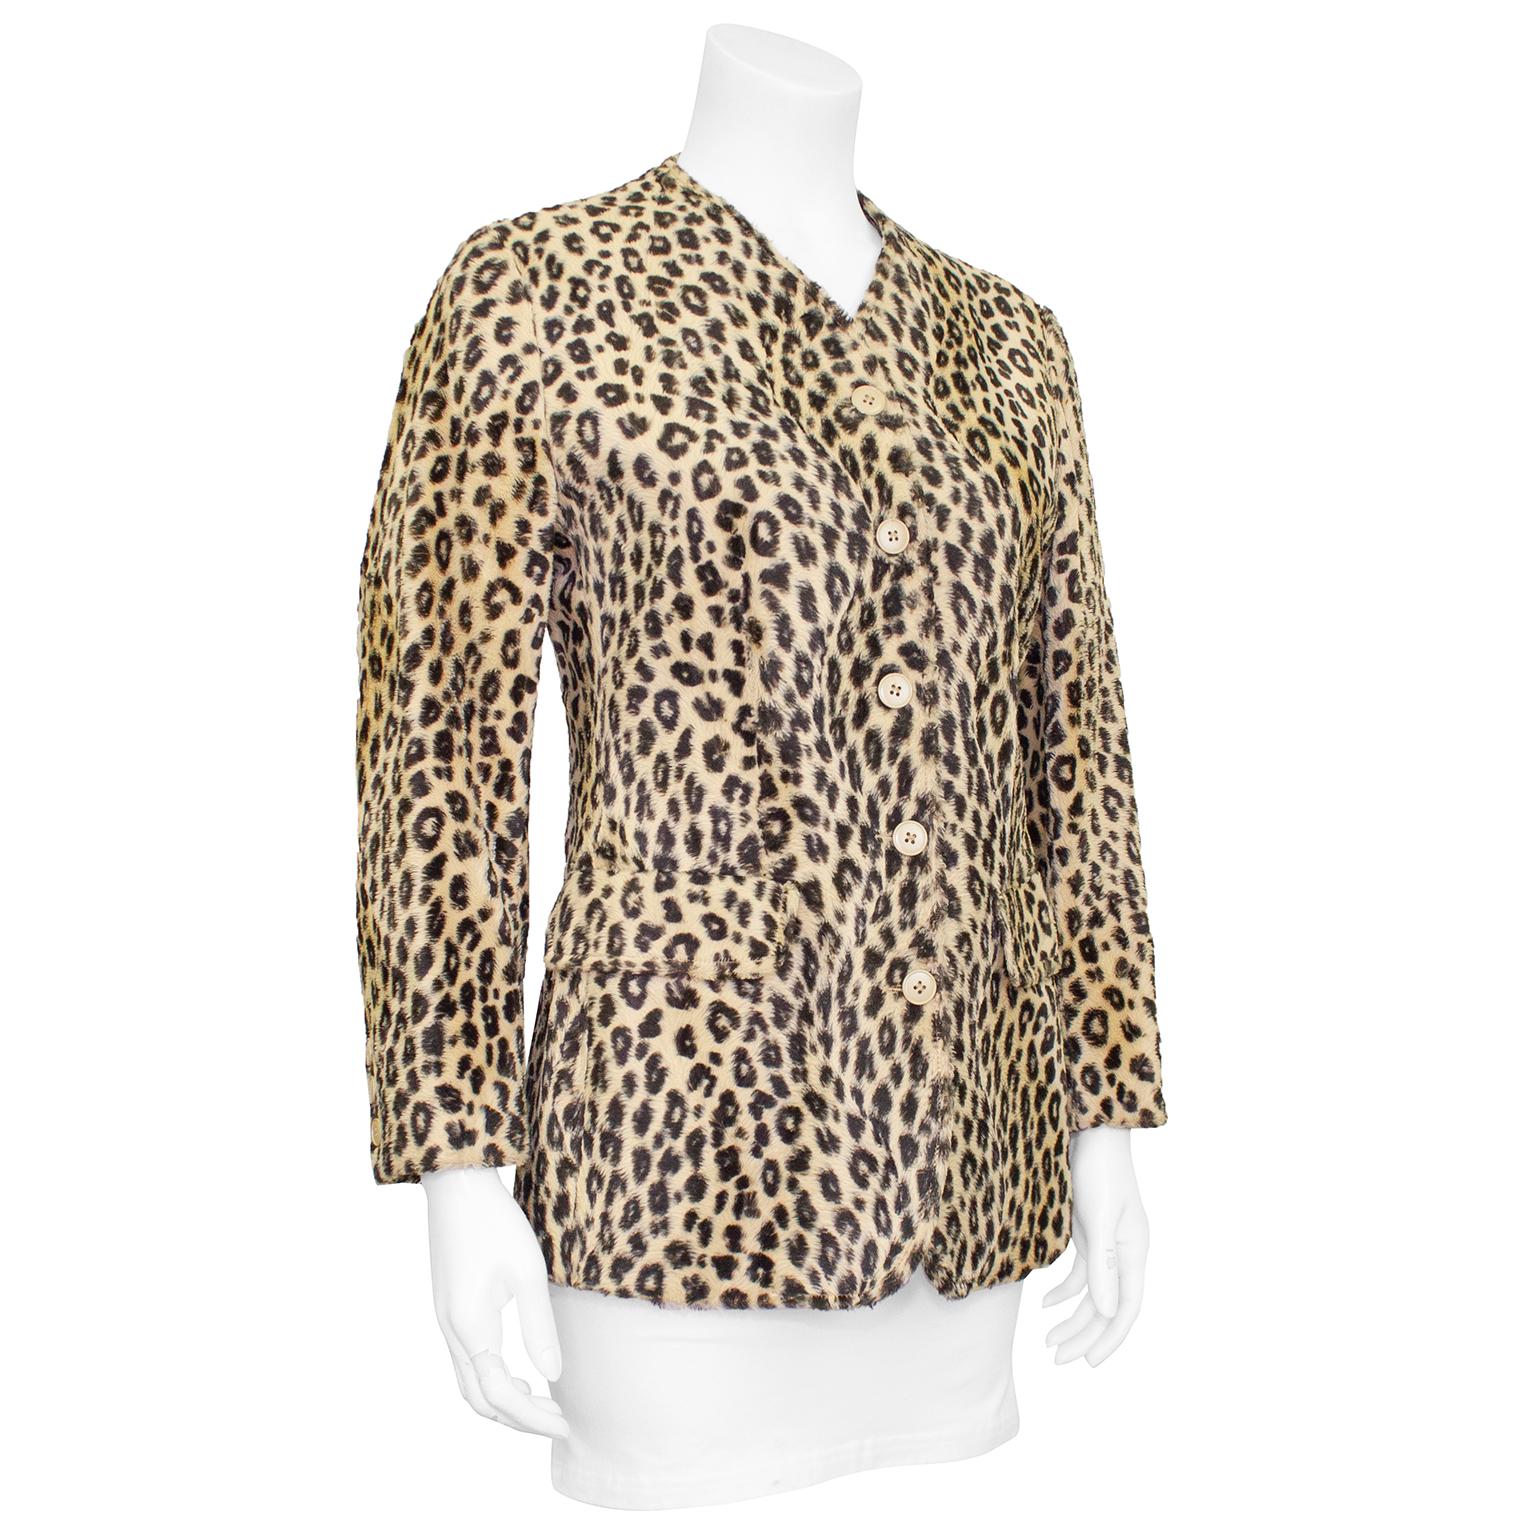 Beautiful Kenzo leopard faux fur jacket from the 1980s. Collarless with high v neckline, beige plastic buttons and flap pockets at hips. Champagne colored silk interior lining with extra button still attached. Excellent vintage condition. Purchased